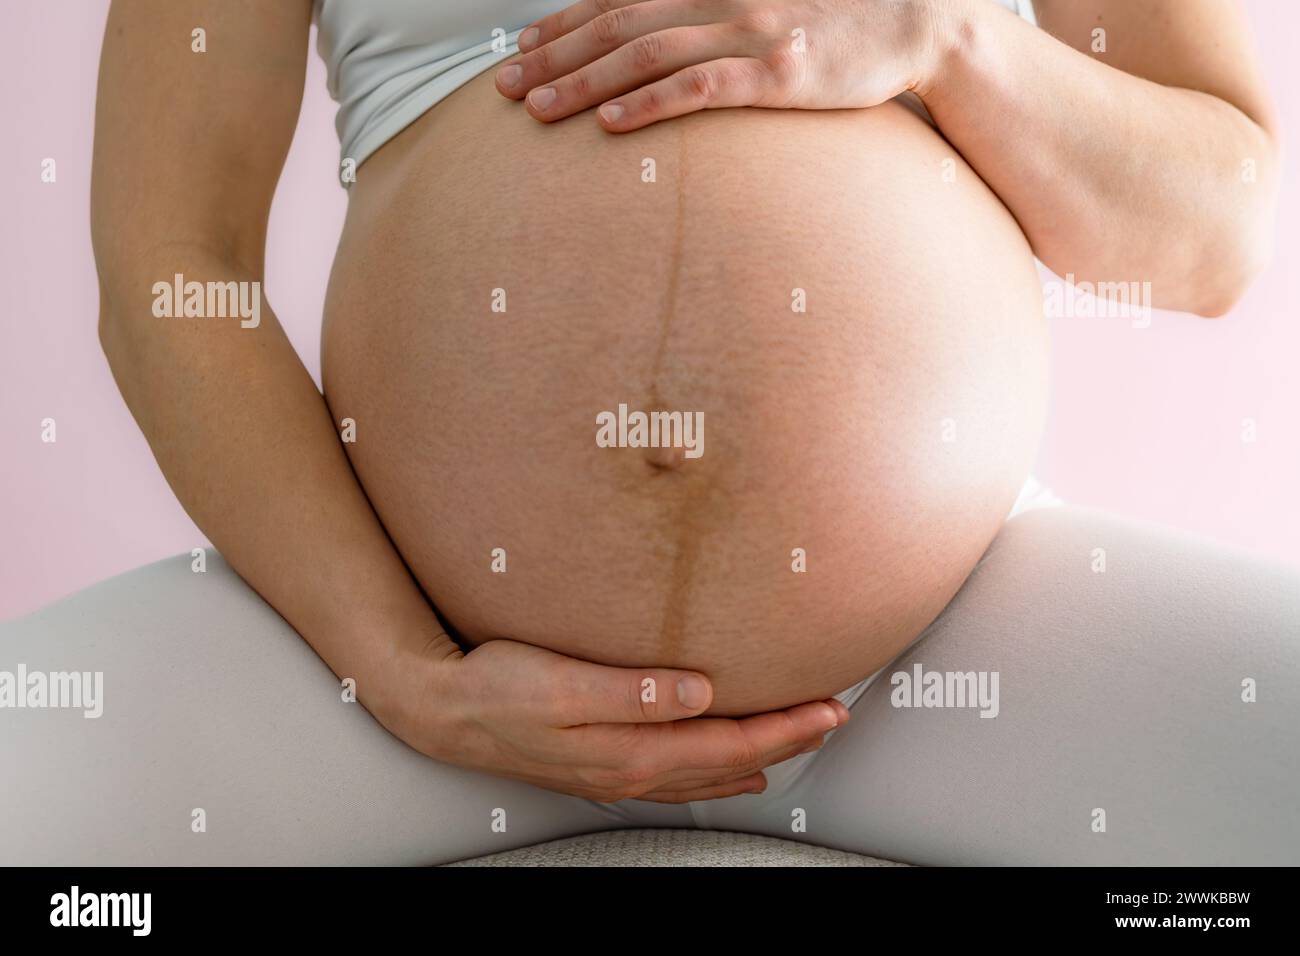 Description: Mother sits on a stool and gently holds her very round pregnant baby bump. Front view. Pink background. Bright shot. Stock Photo